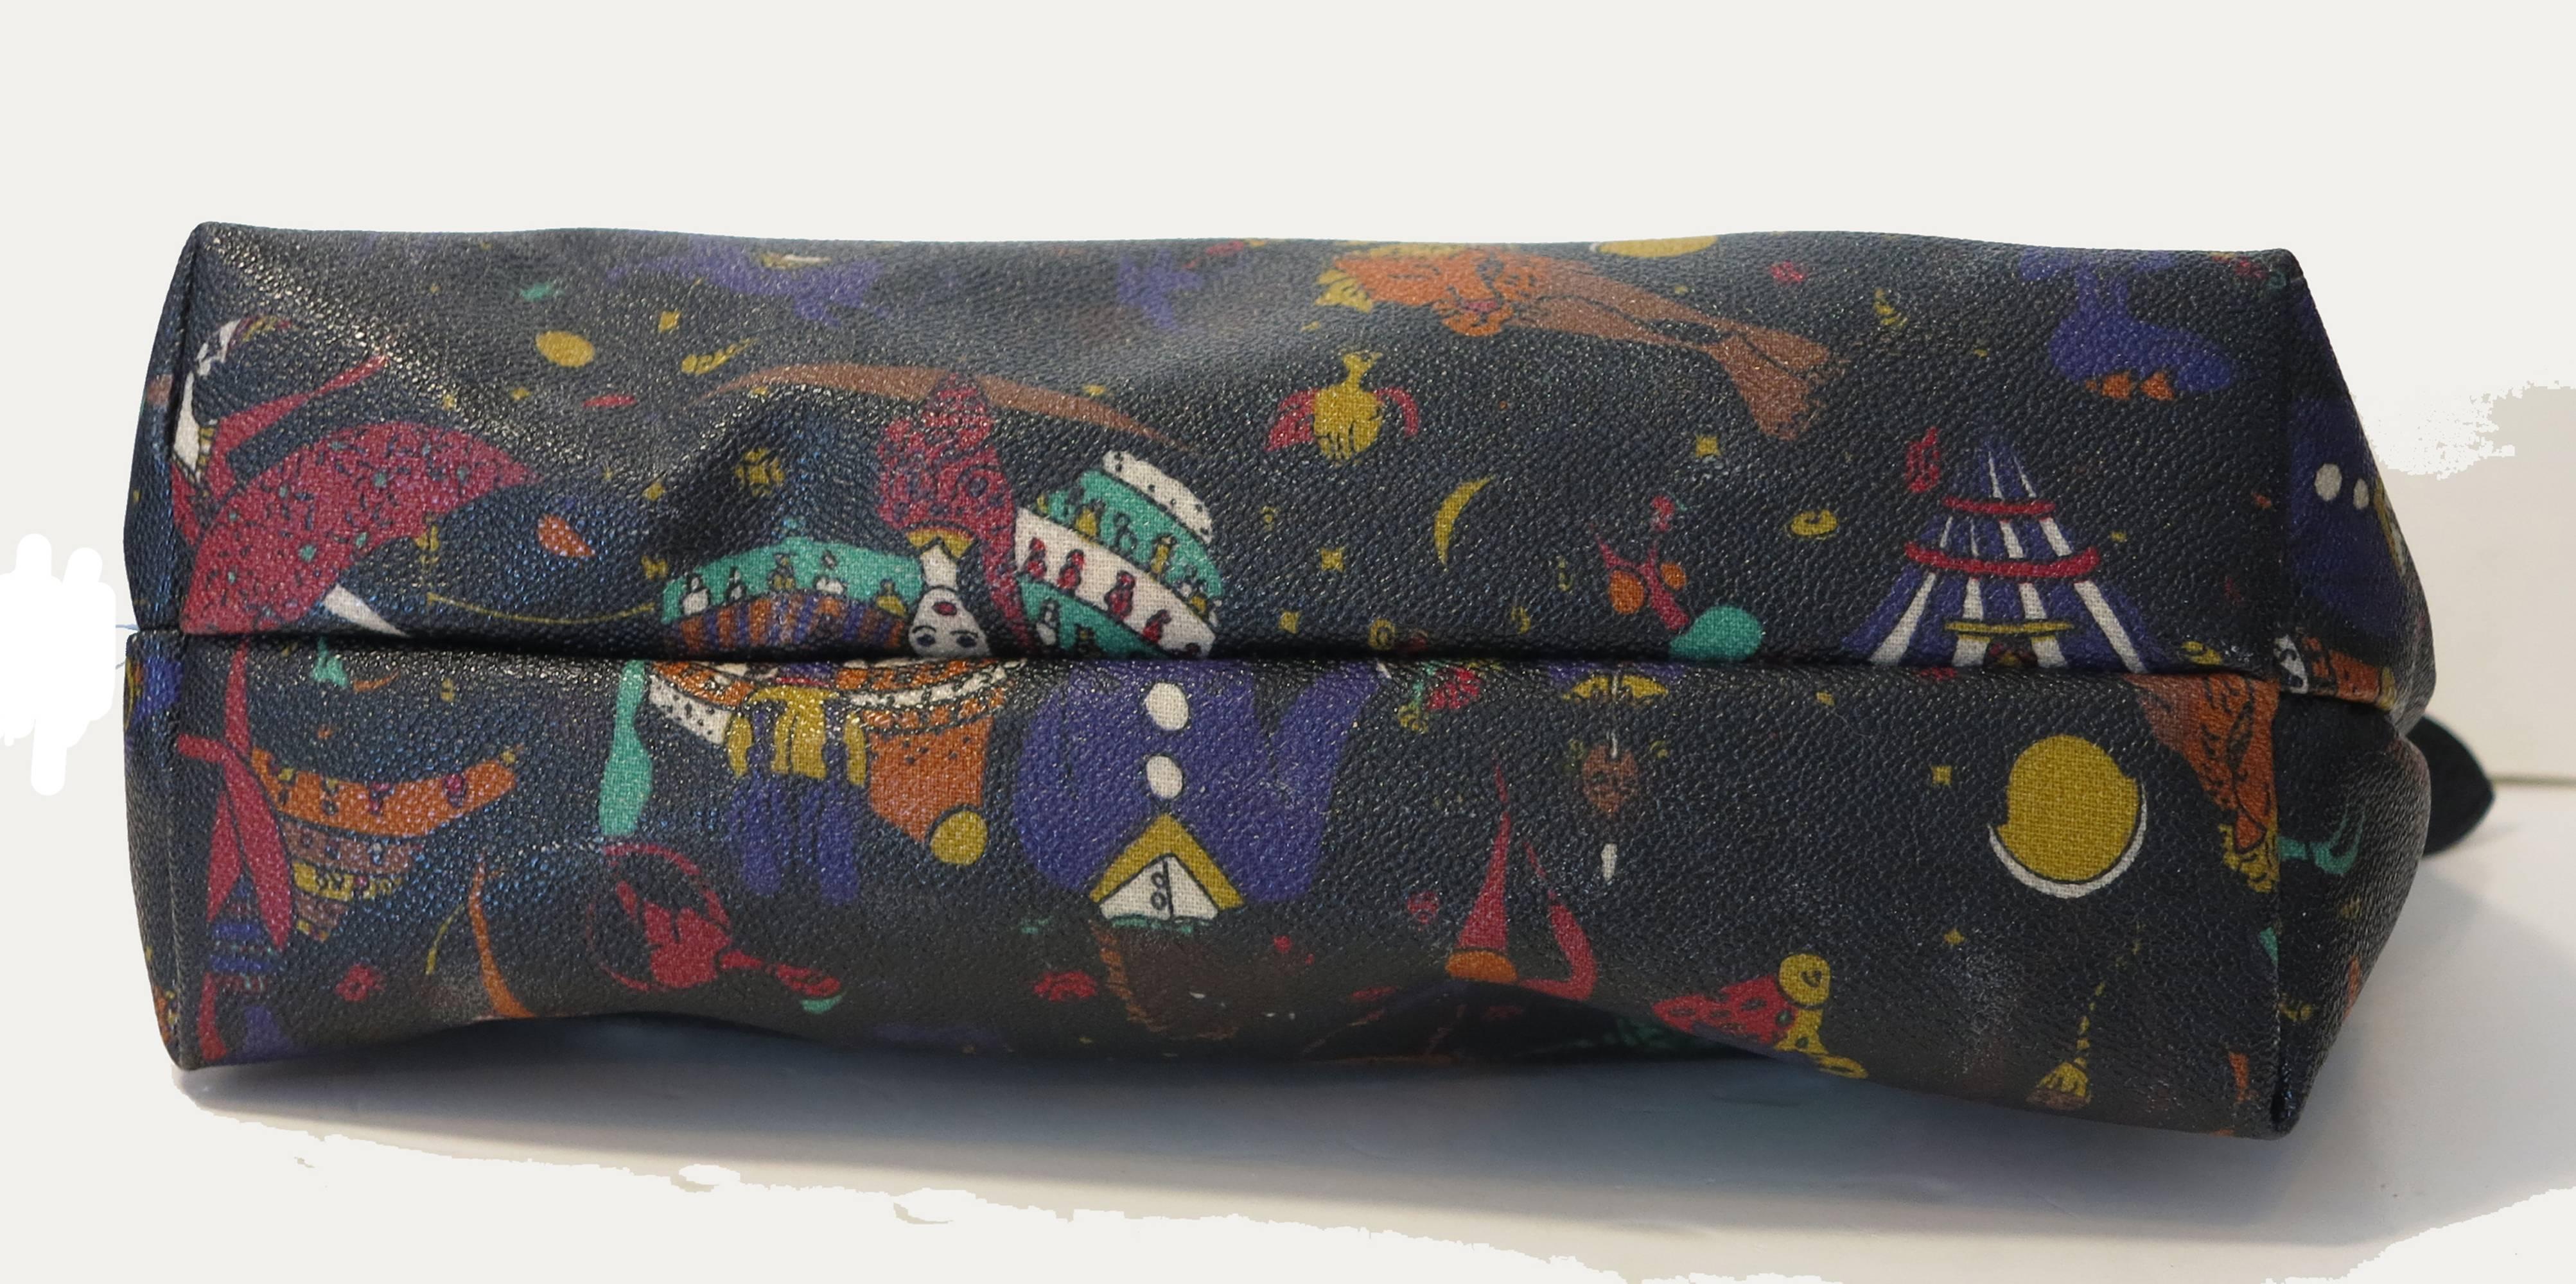 Piero Guidi Magic Circus in black large clutch handbag...Whimsical and bright print of circus performers fly across this black coated canvas print clutch...Zipper top closure...In excellent condition.

Measurements are:
11